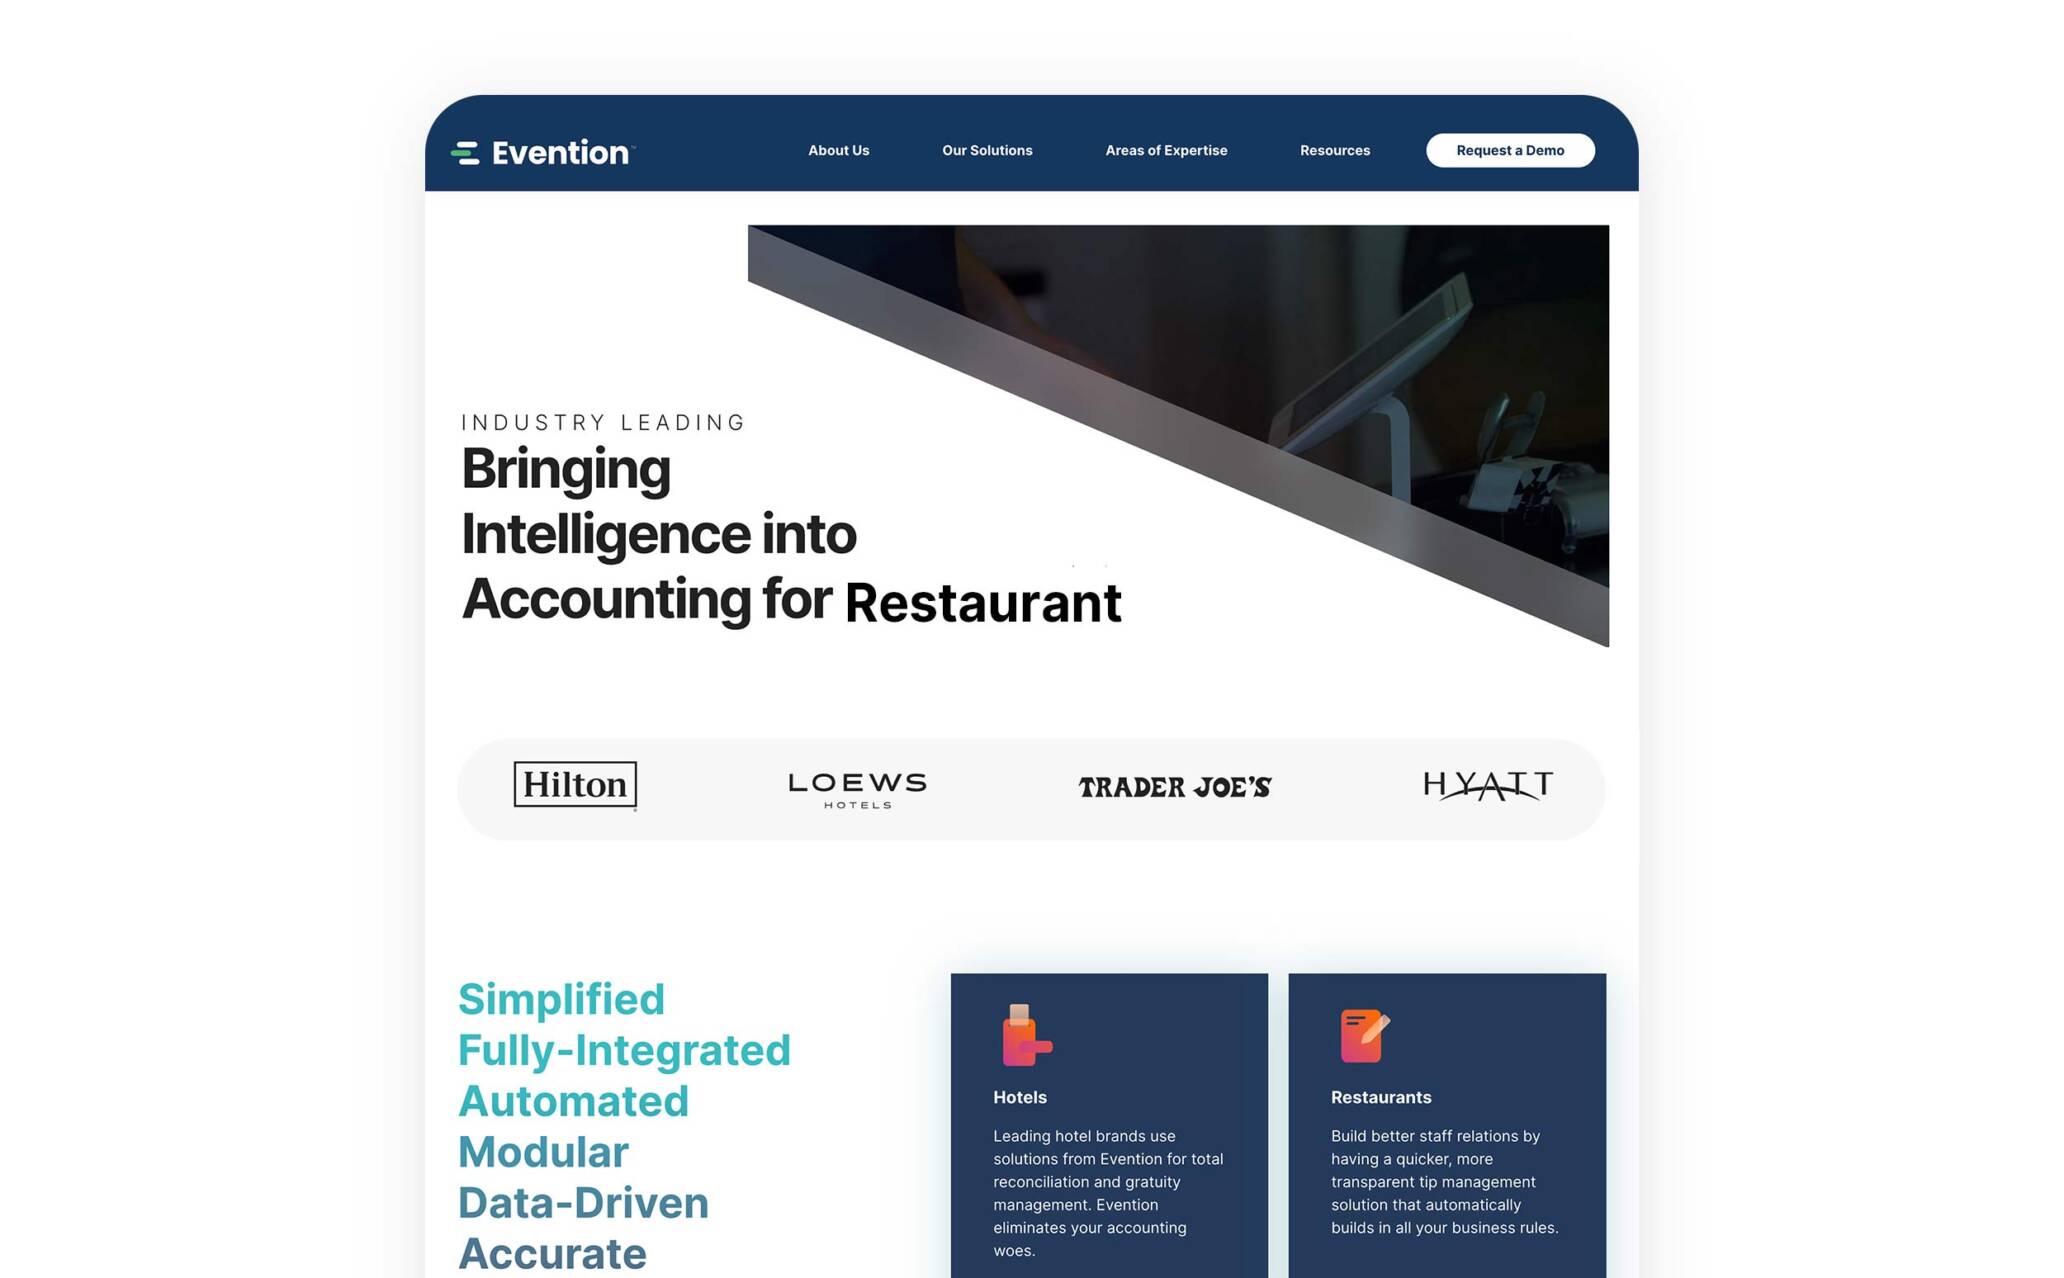 Bringing Intelligence into Accounting for Restaurant UI screen design.